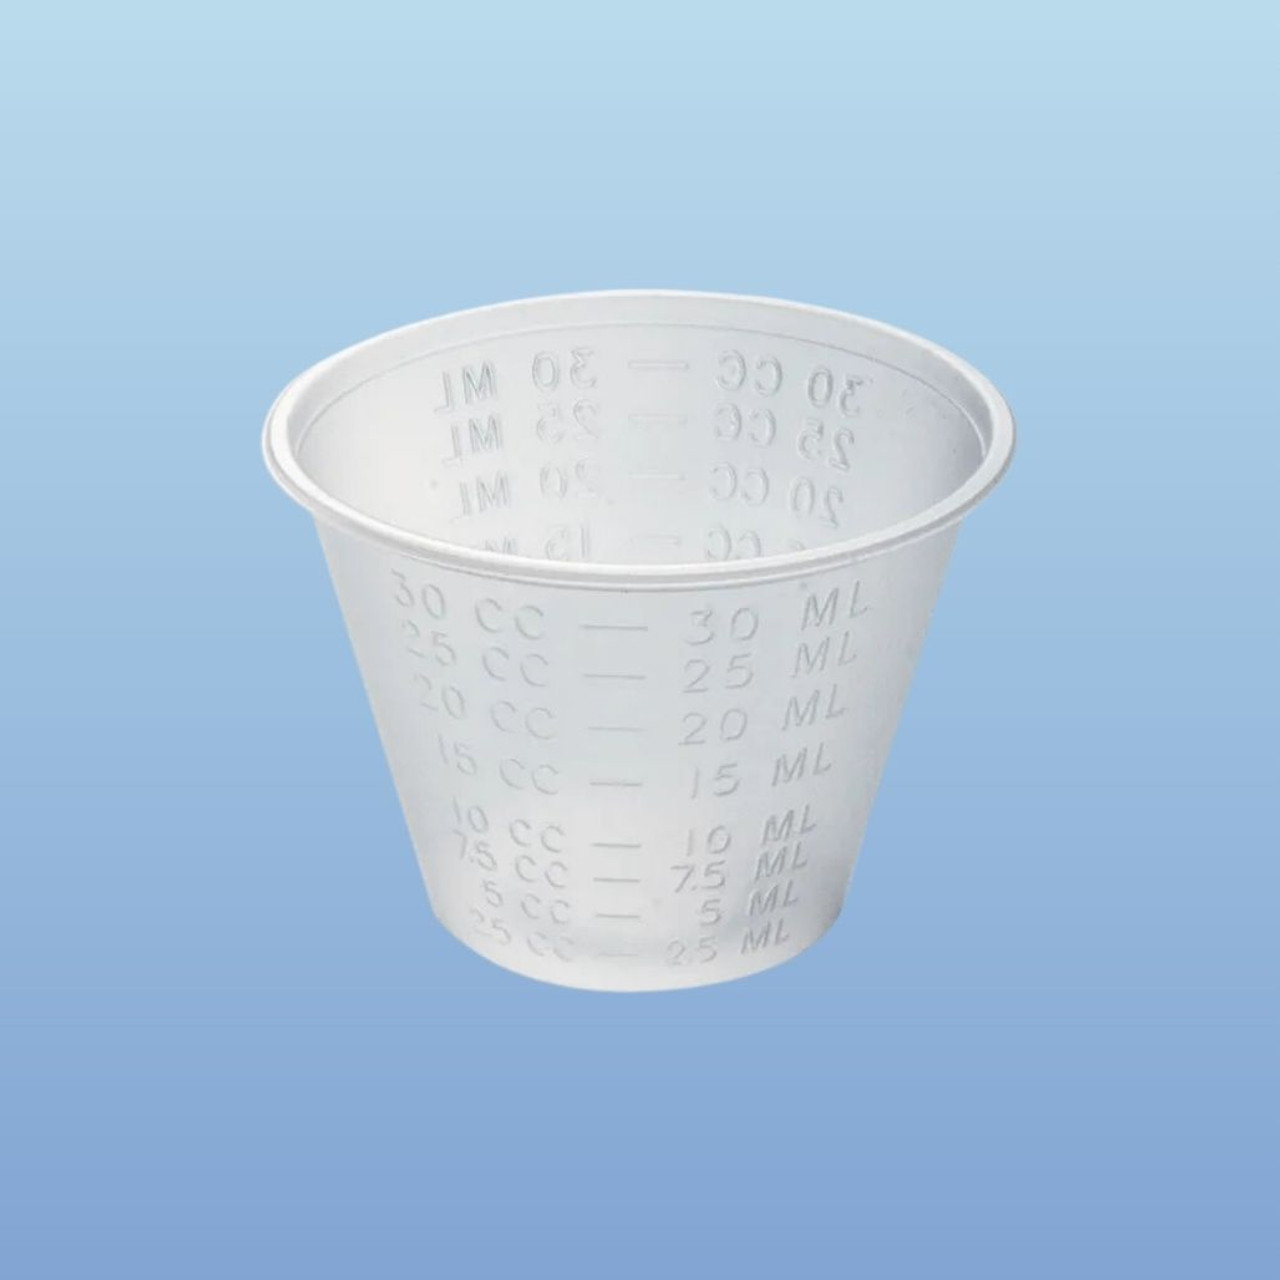 15ml Plastic Graduated Measuring Cup Liquid Container With Scale